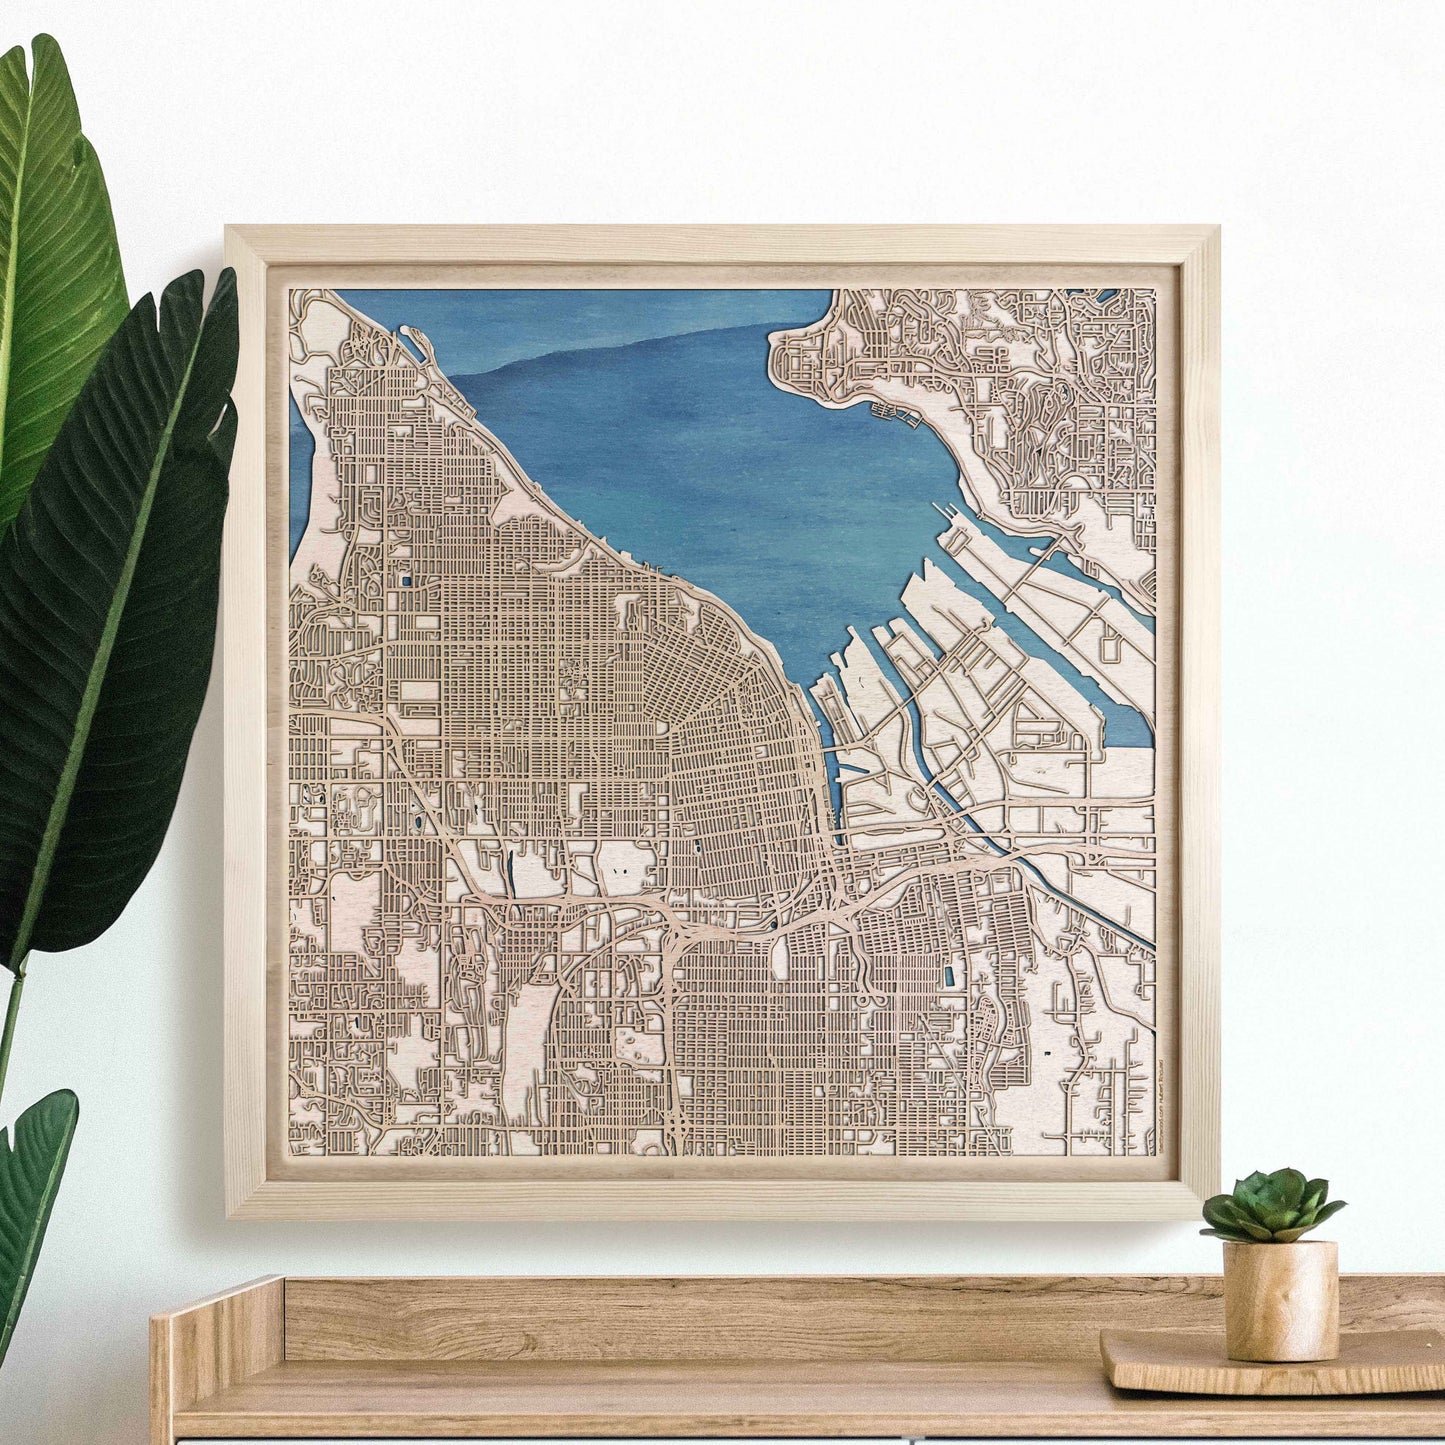 Tacoma Wooden Map by CityWood - Custom Wood Map Art - Unique Laser Cut Engraved - Anniversary Gift